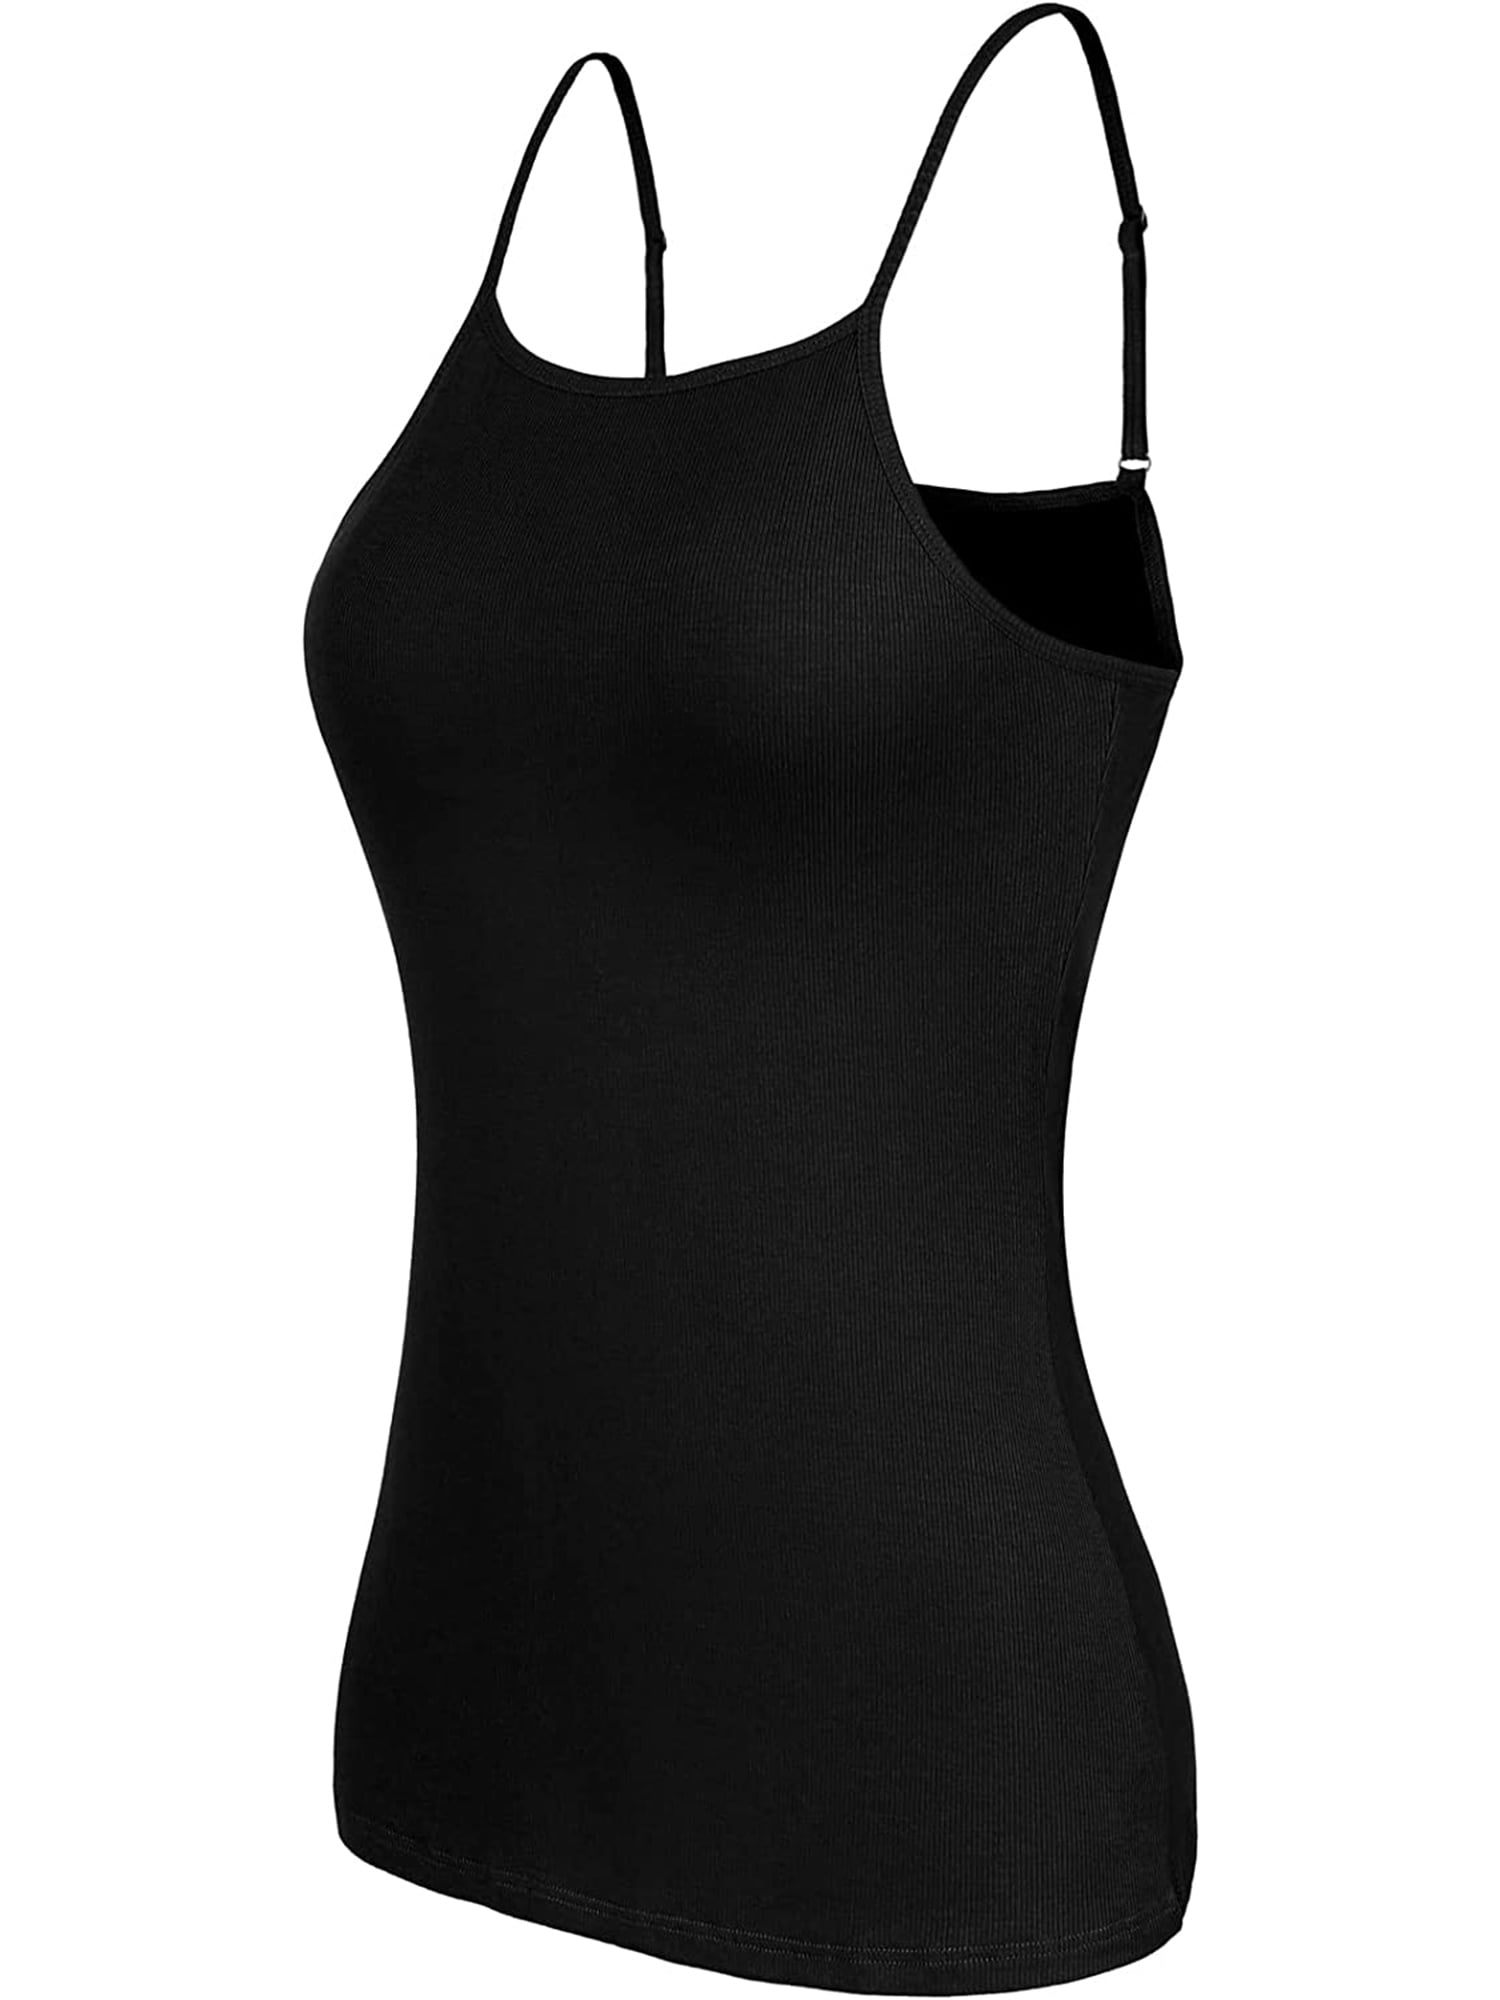 Charmo Camisole for Women with Built-in Shelf Bra Adjustable Spaghetti ...